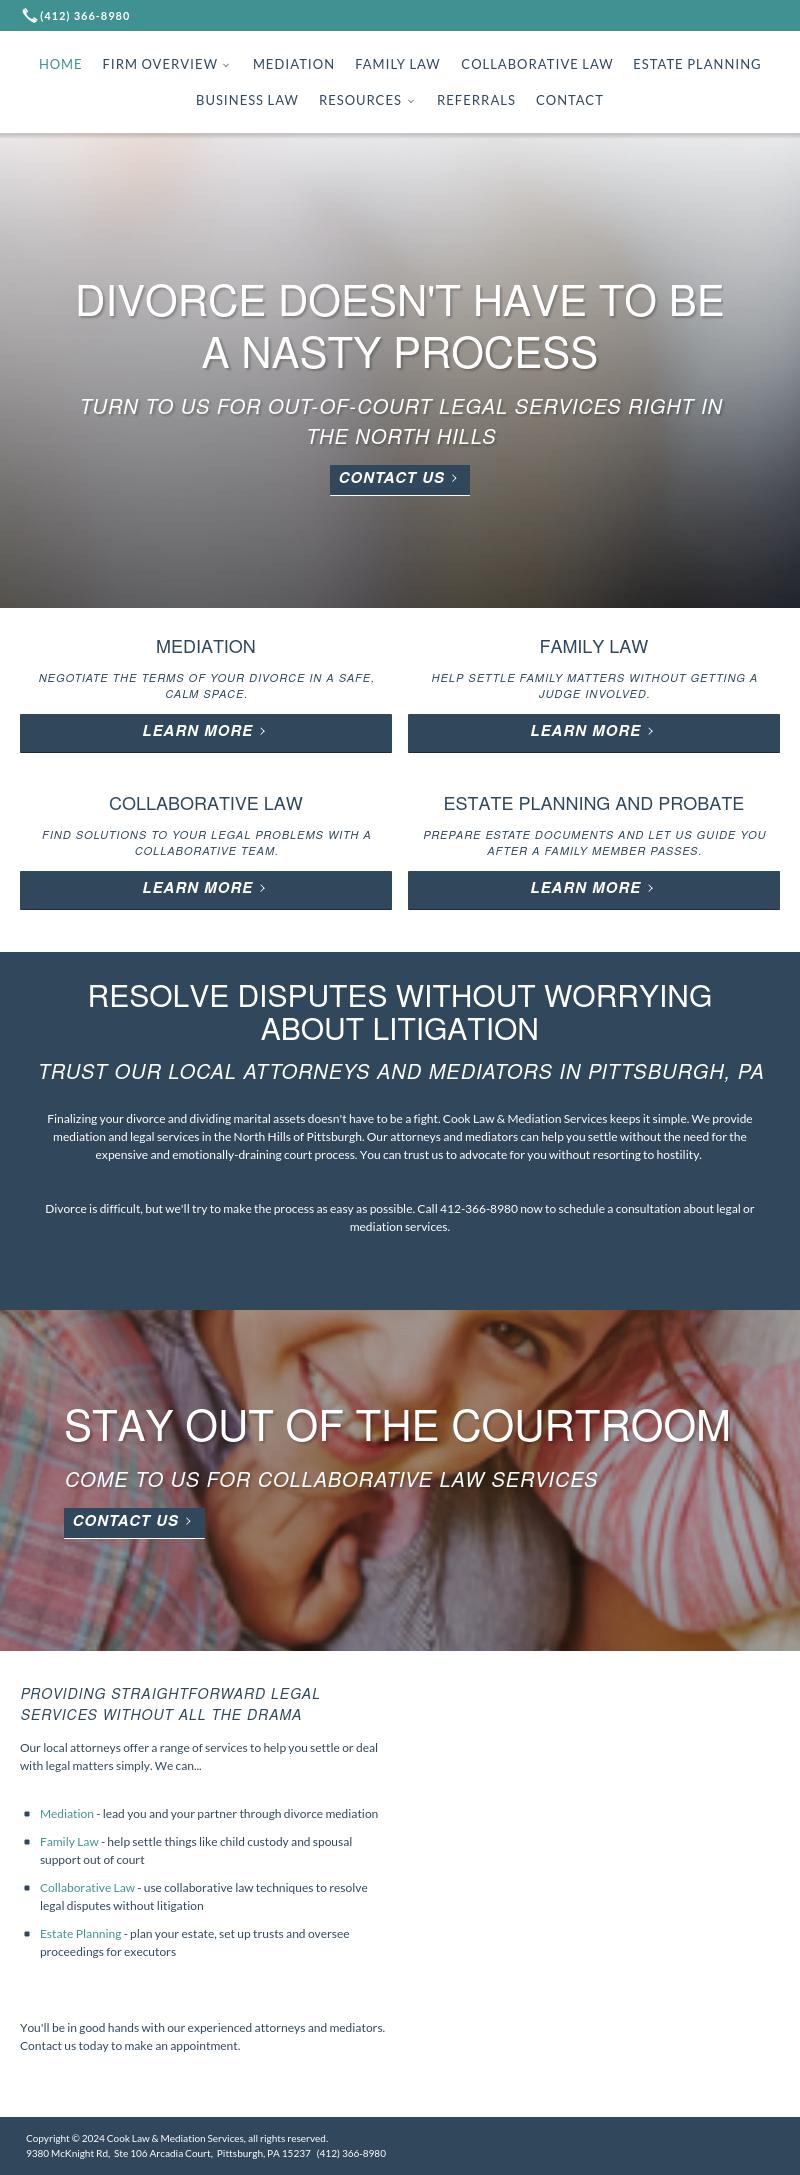 Cook & Associates - Pittsburgh PA Lawyers